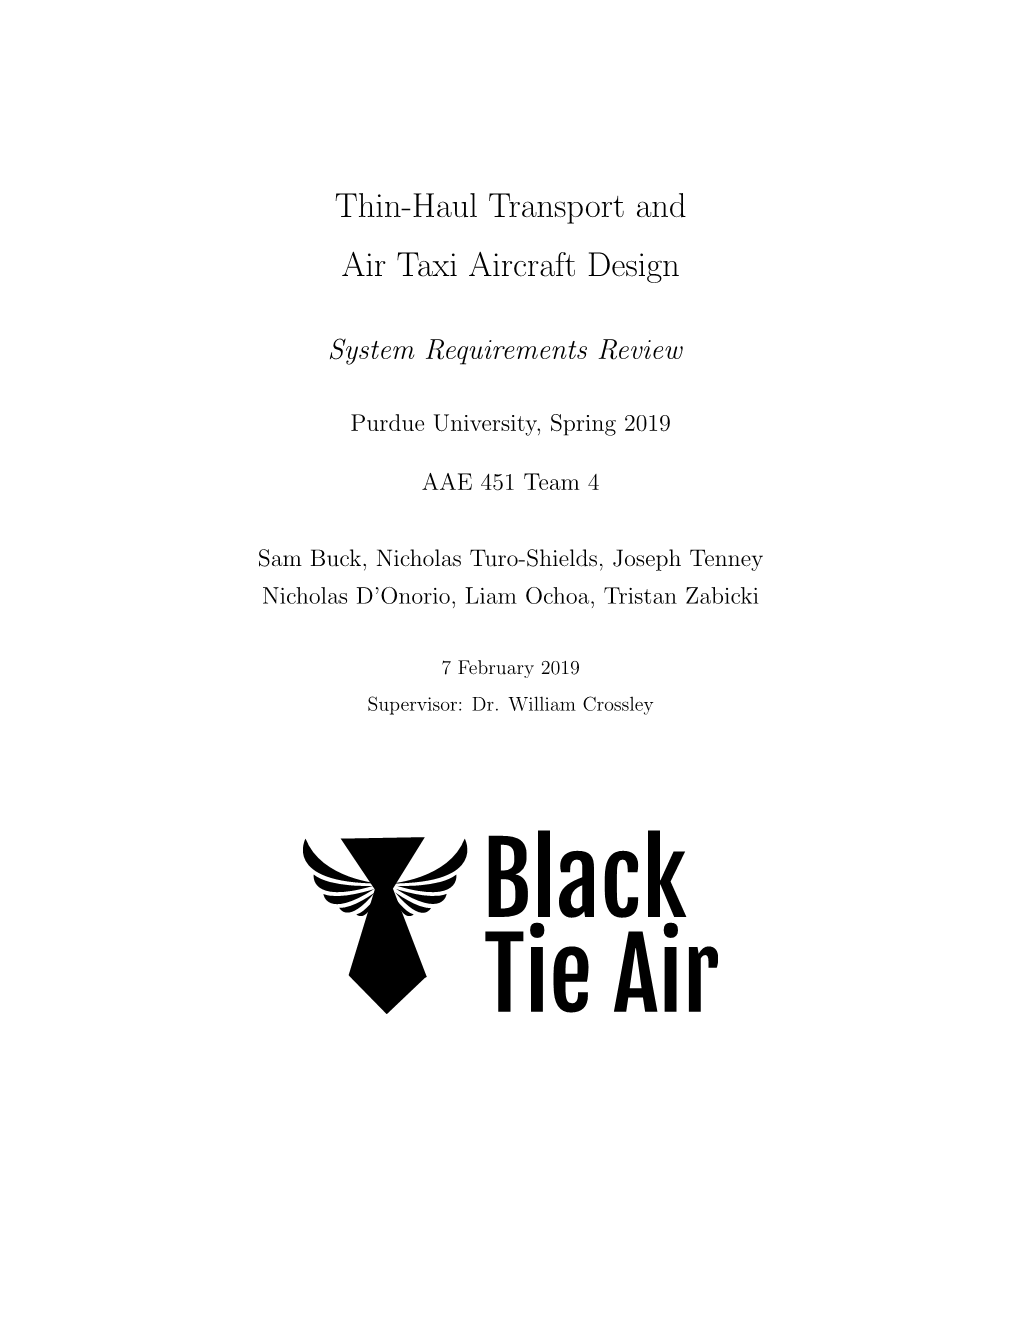 Thin-Haul Transport and Air Taxi Aircraft Design